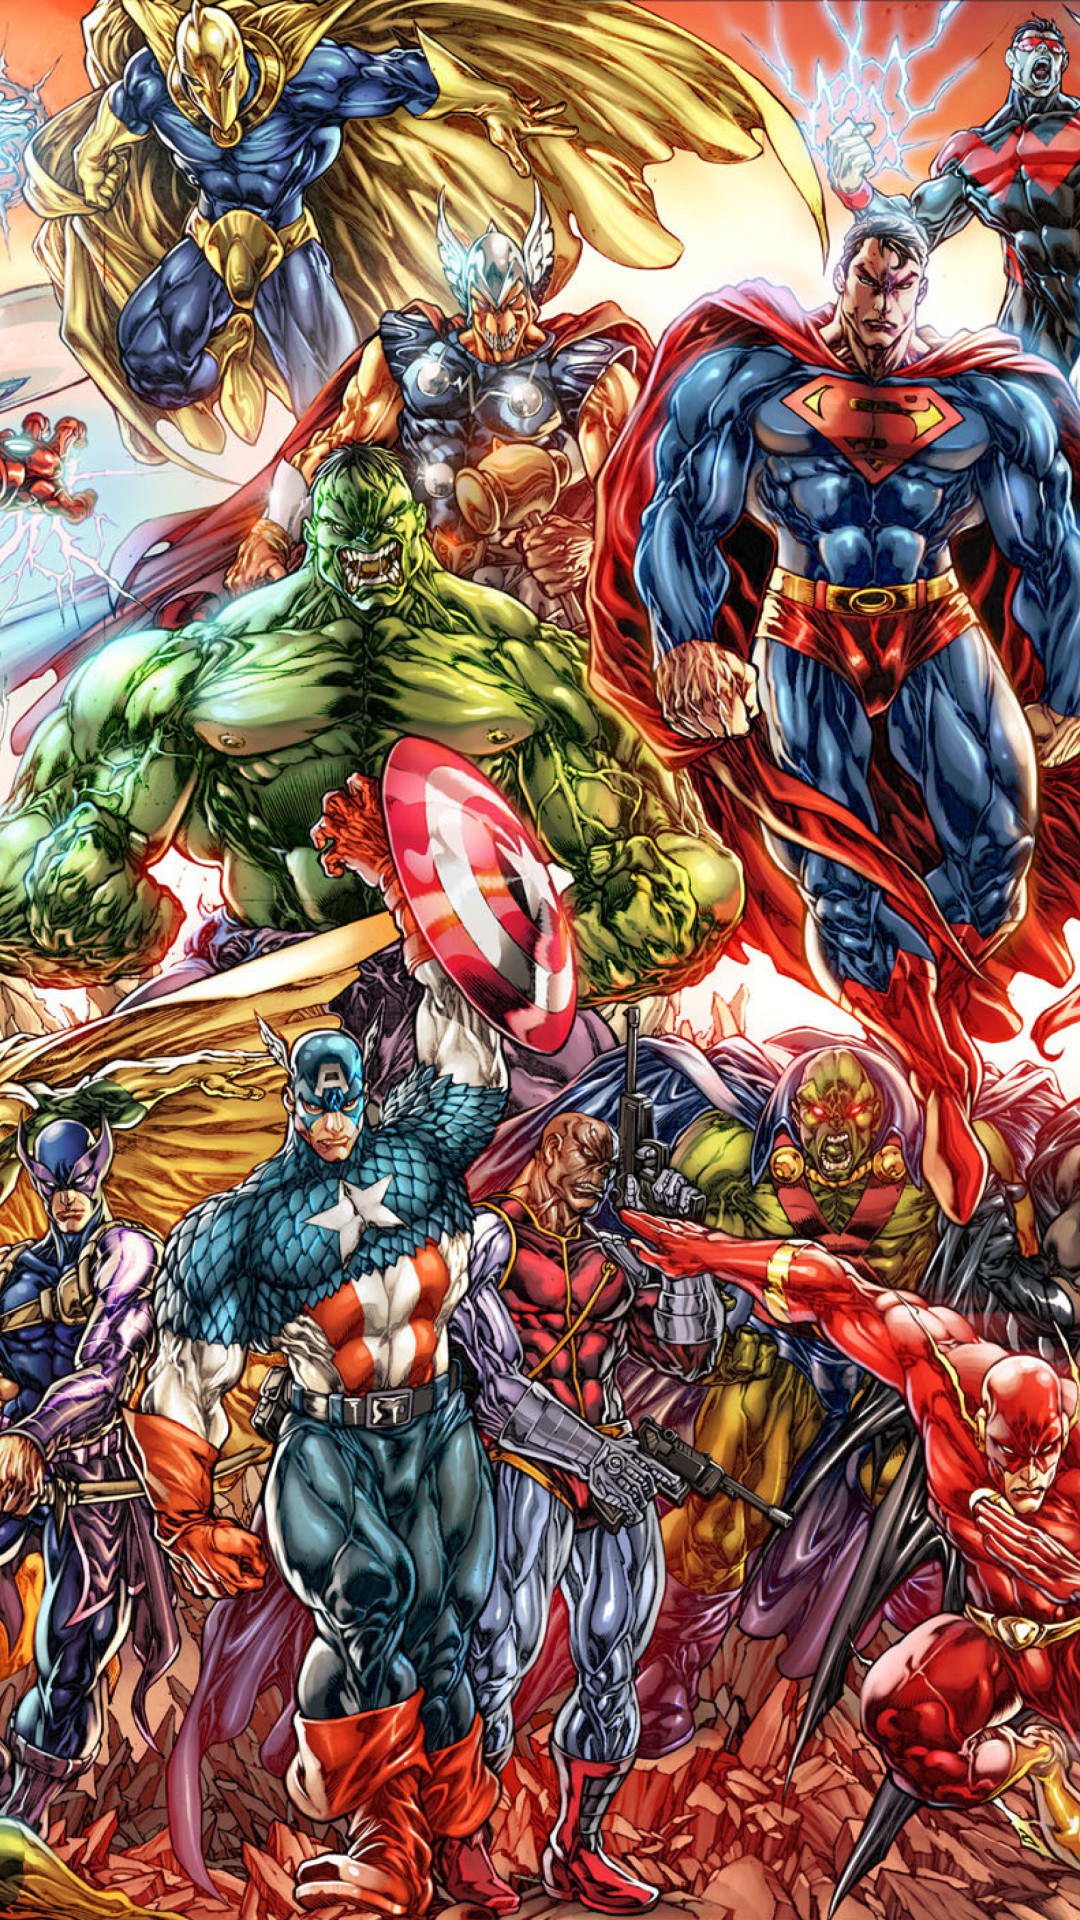 1080x1920 Marvel Wallpaper for Iphone Free Download.